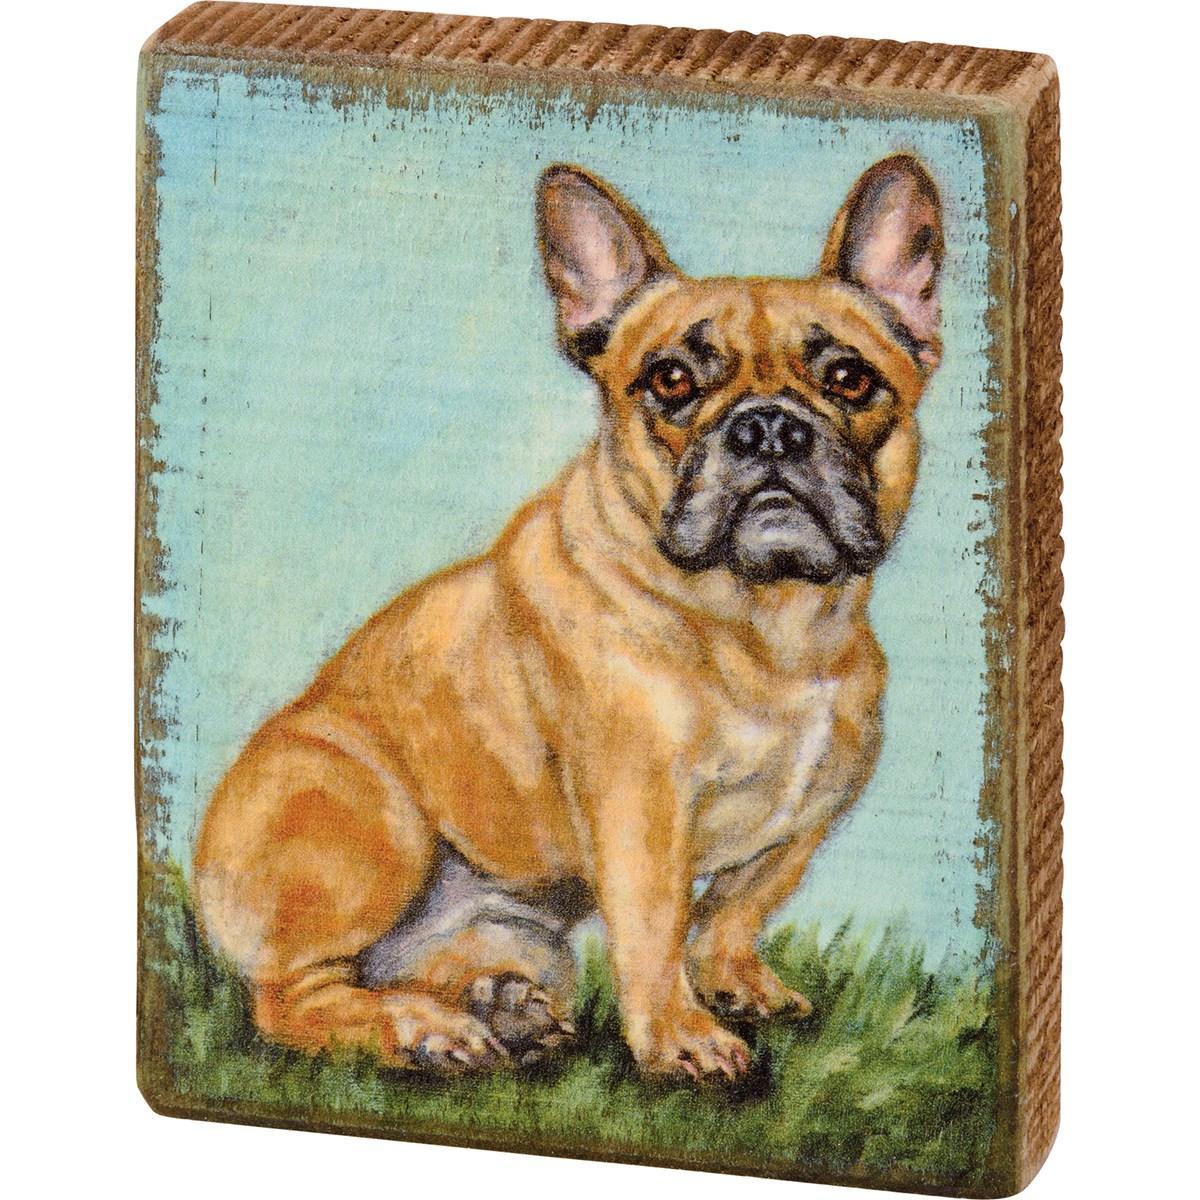 Frenchie Block Sign